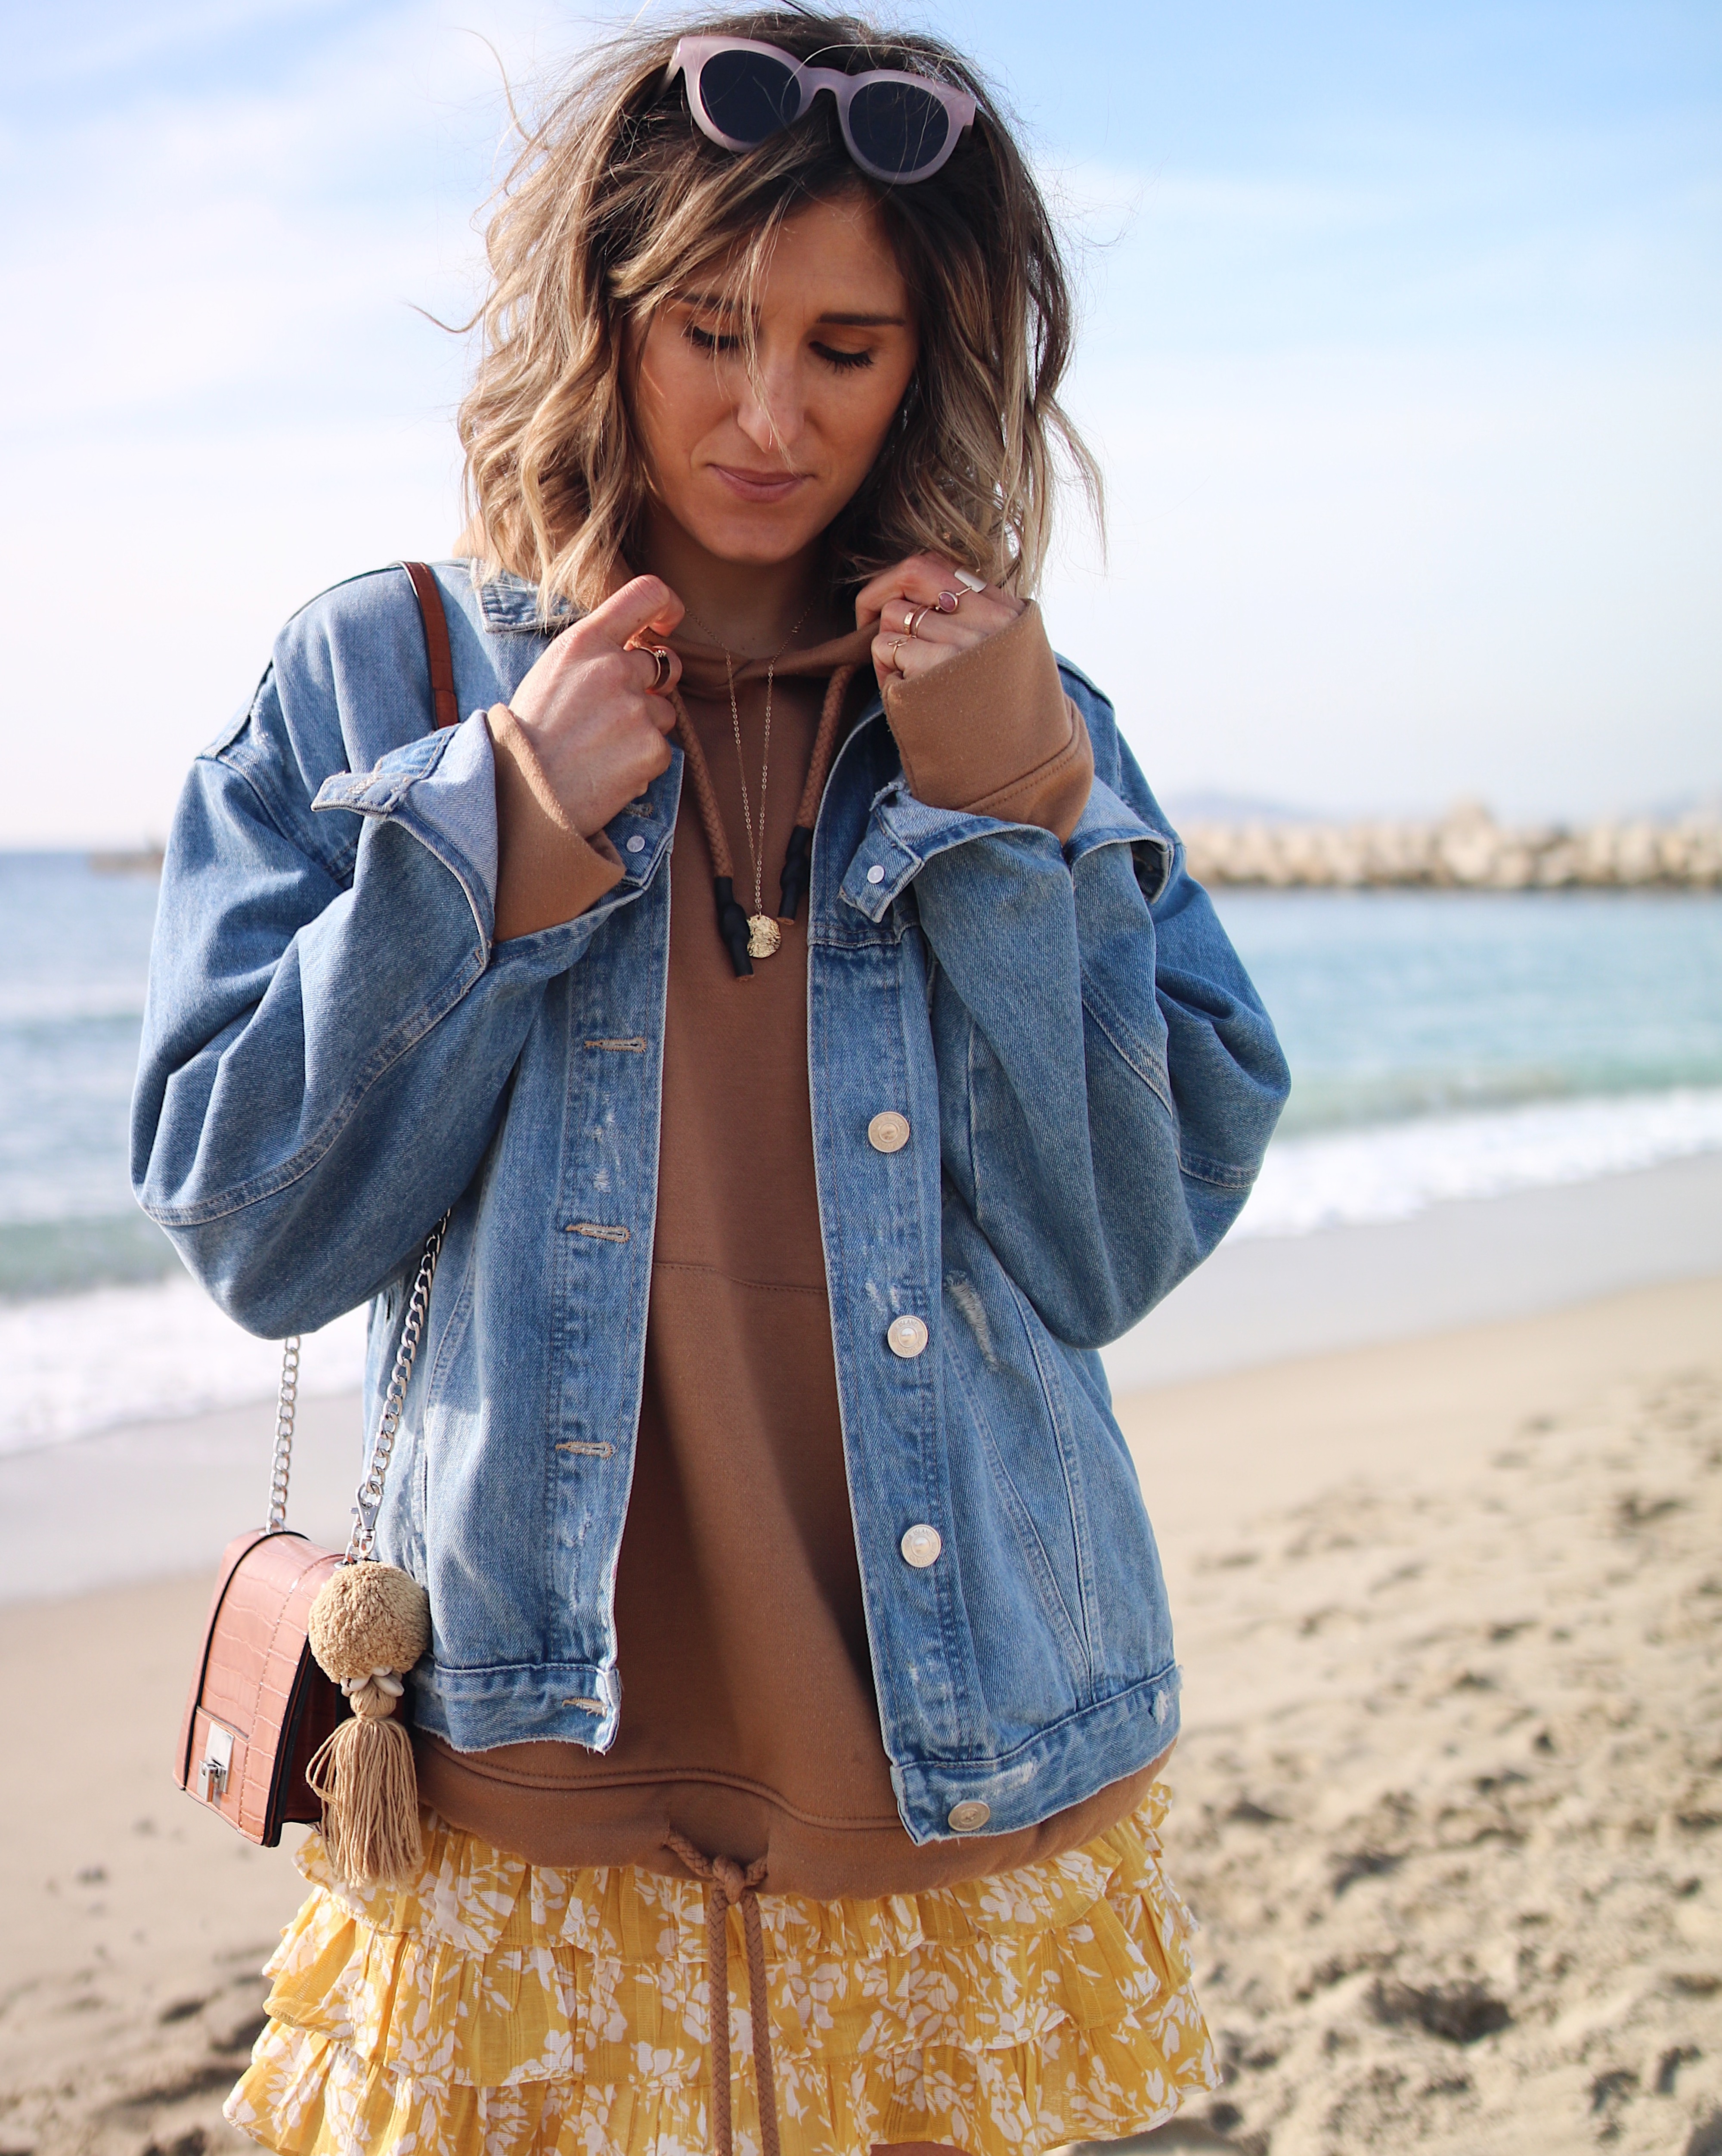 MINI MINI - Chon & CHON -mini skirt from Tularosa, casual style, outfit inspiration, sweater lover, beach outfit, mini jupe et gros sweat, hoodie style